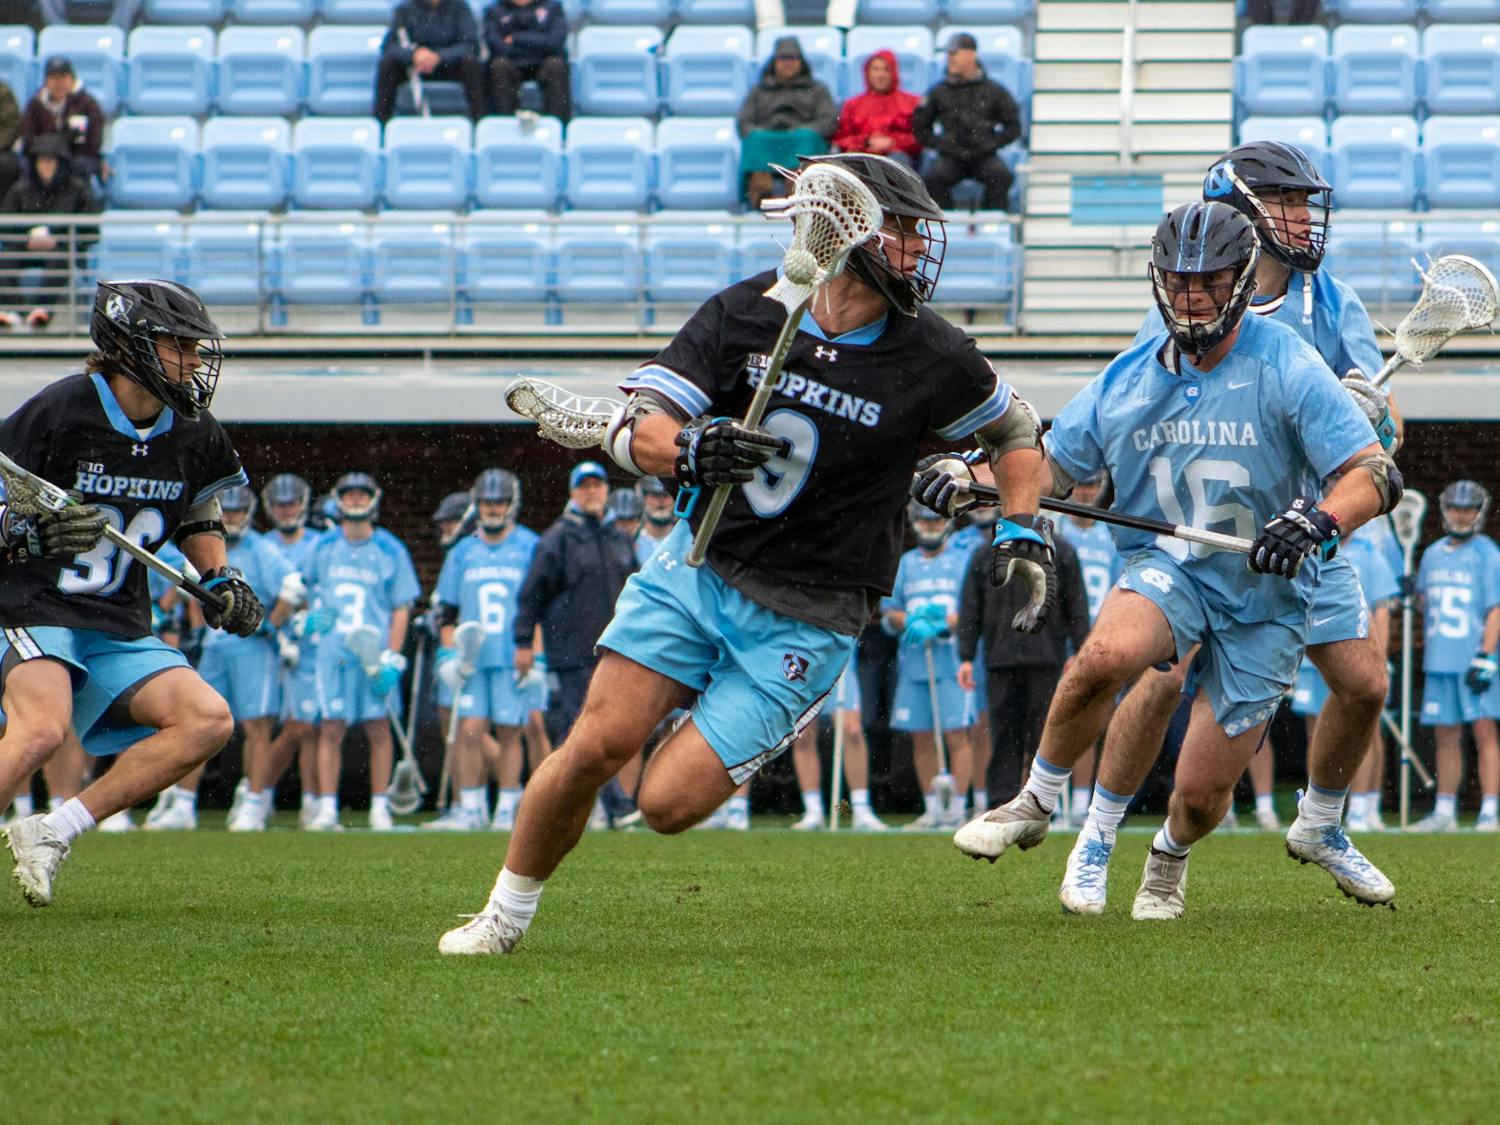 5th year defenseman Sean Morris (16) keeps pace with the other team in the Feb. 27 men's lacrosse game against Johns Hopkins University. UNC won 15-9.